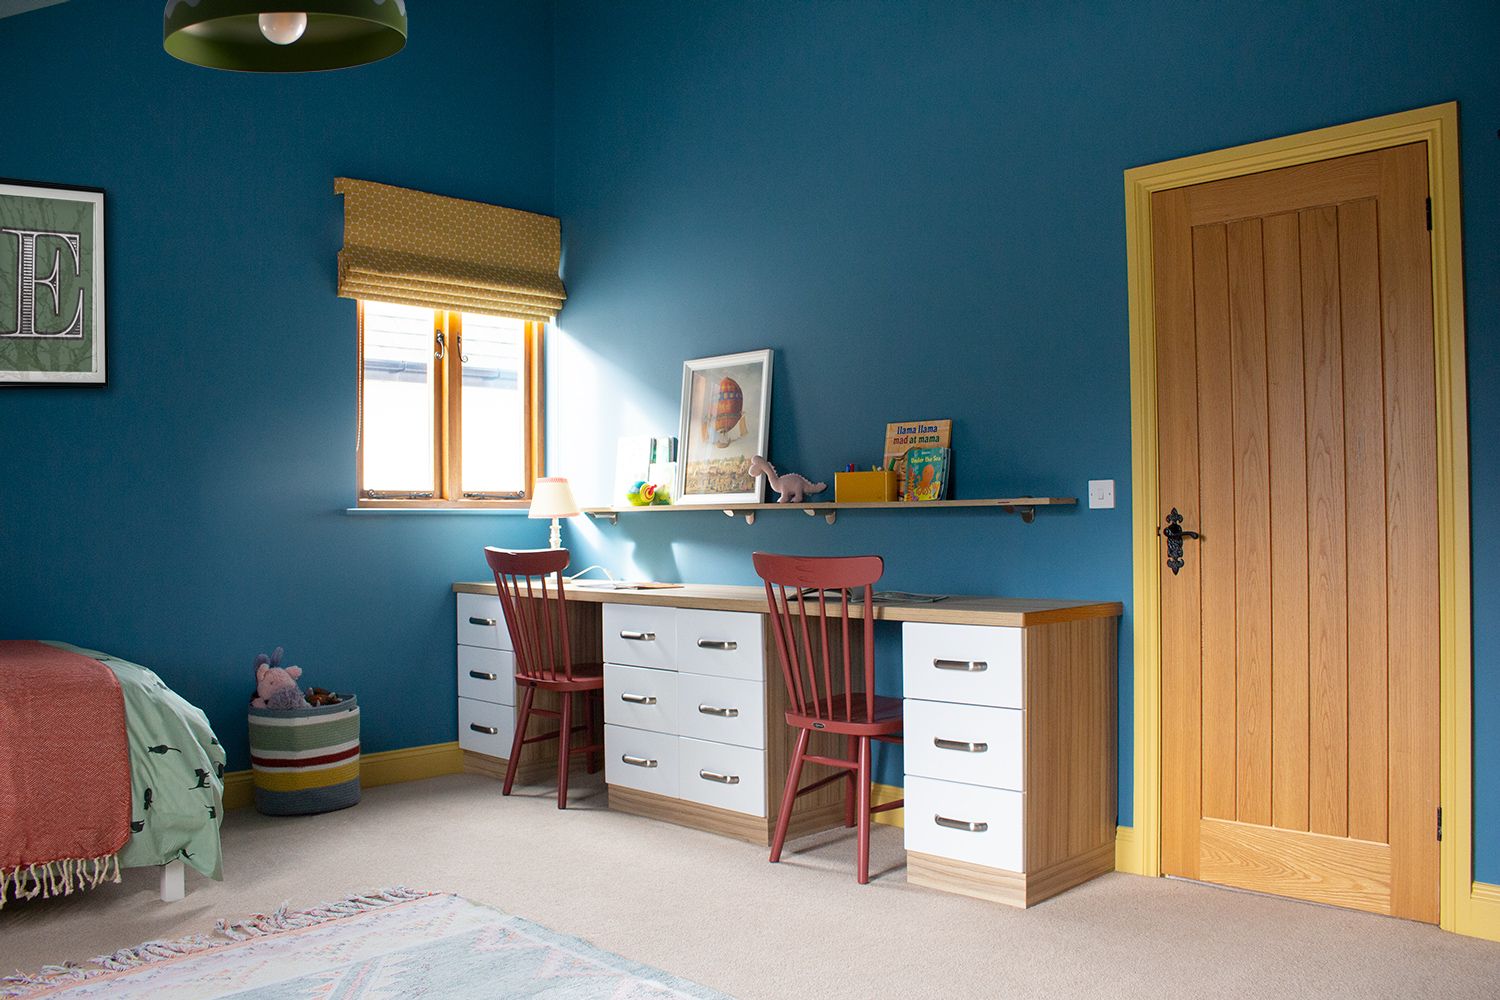 A photo of a child's bedroom showing the desk area with two burgundy chairs against blue walls with yellow accents,